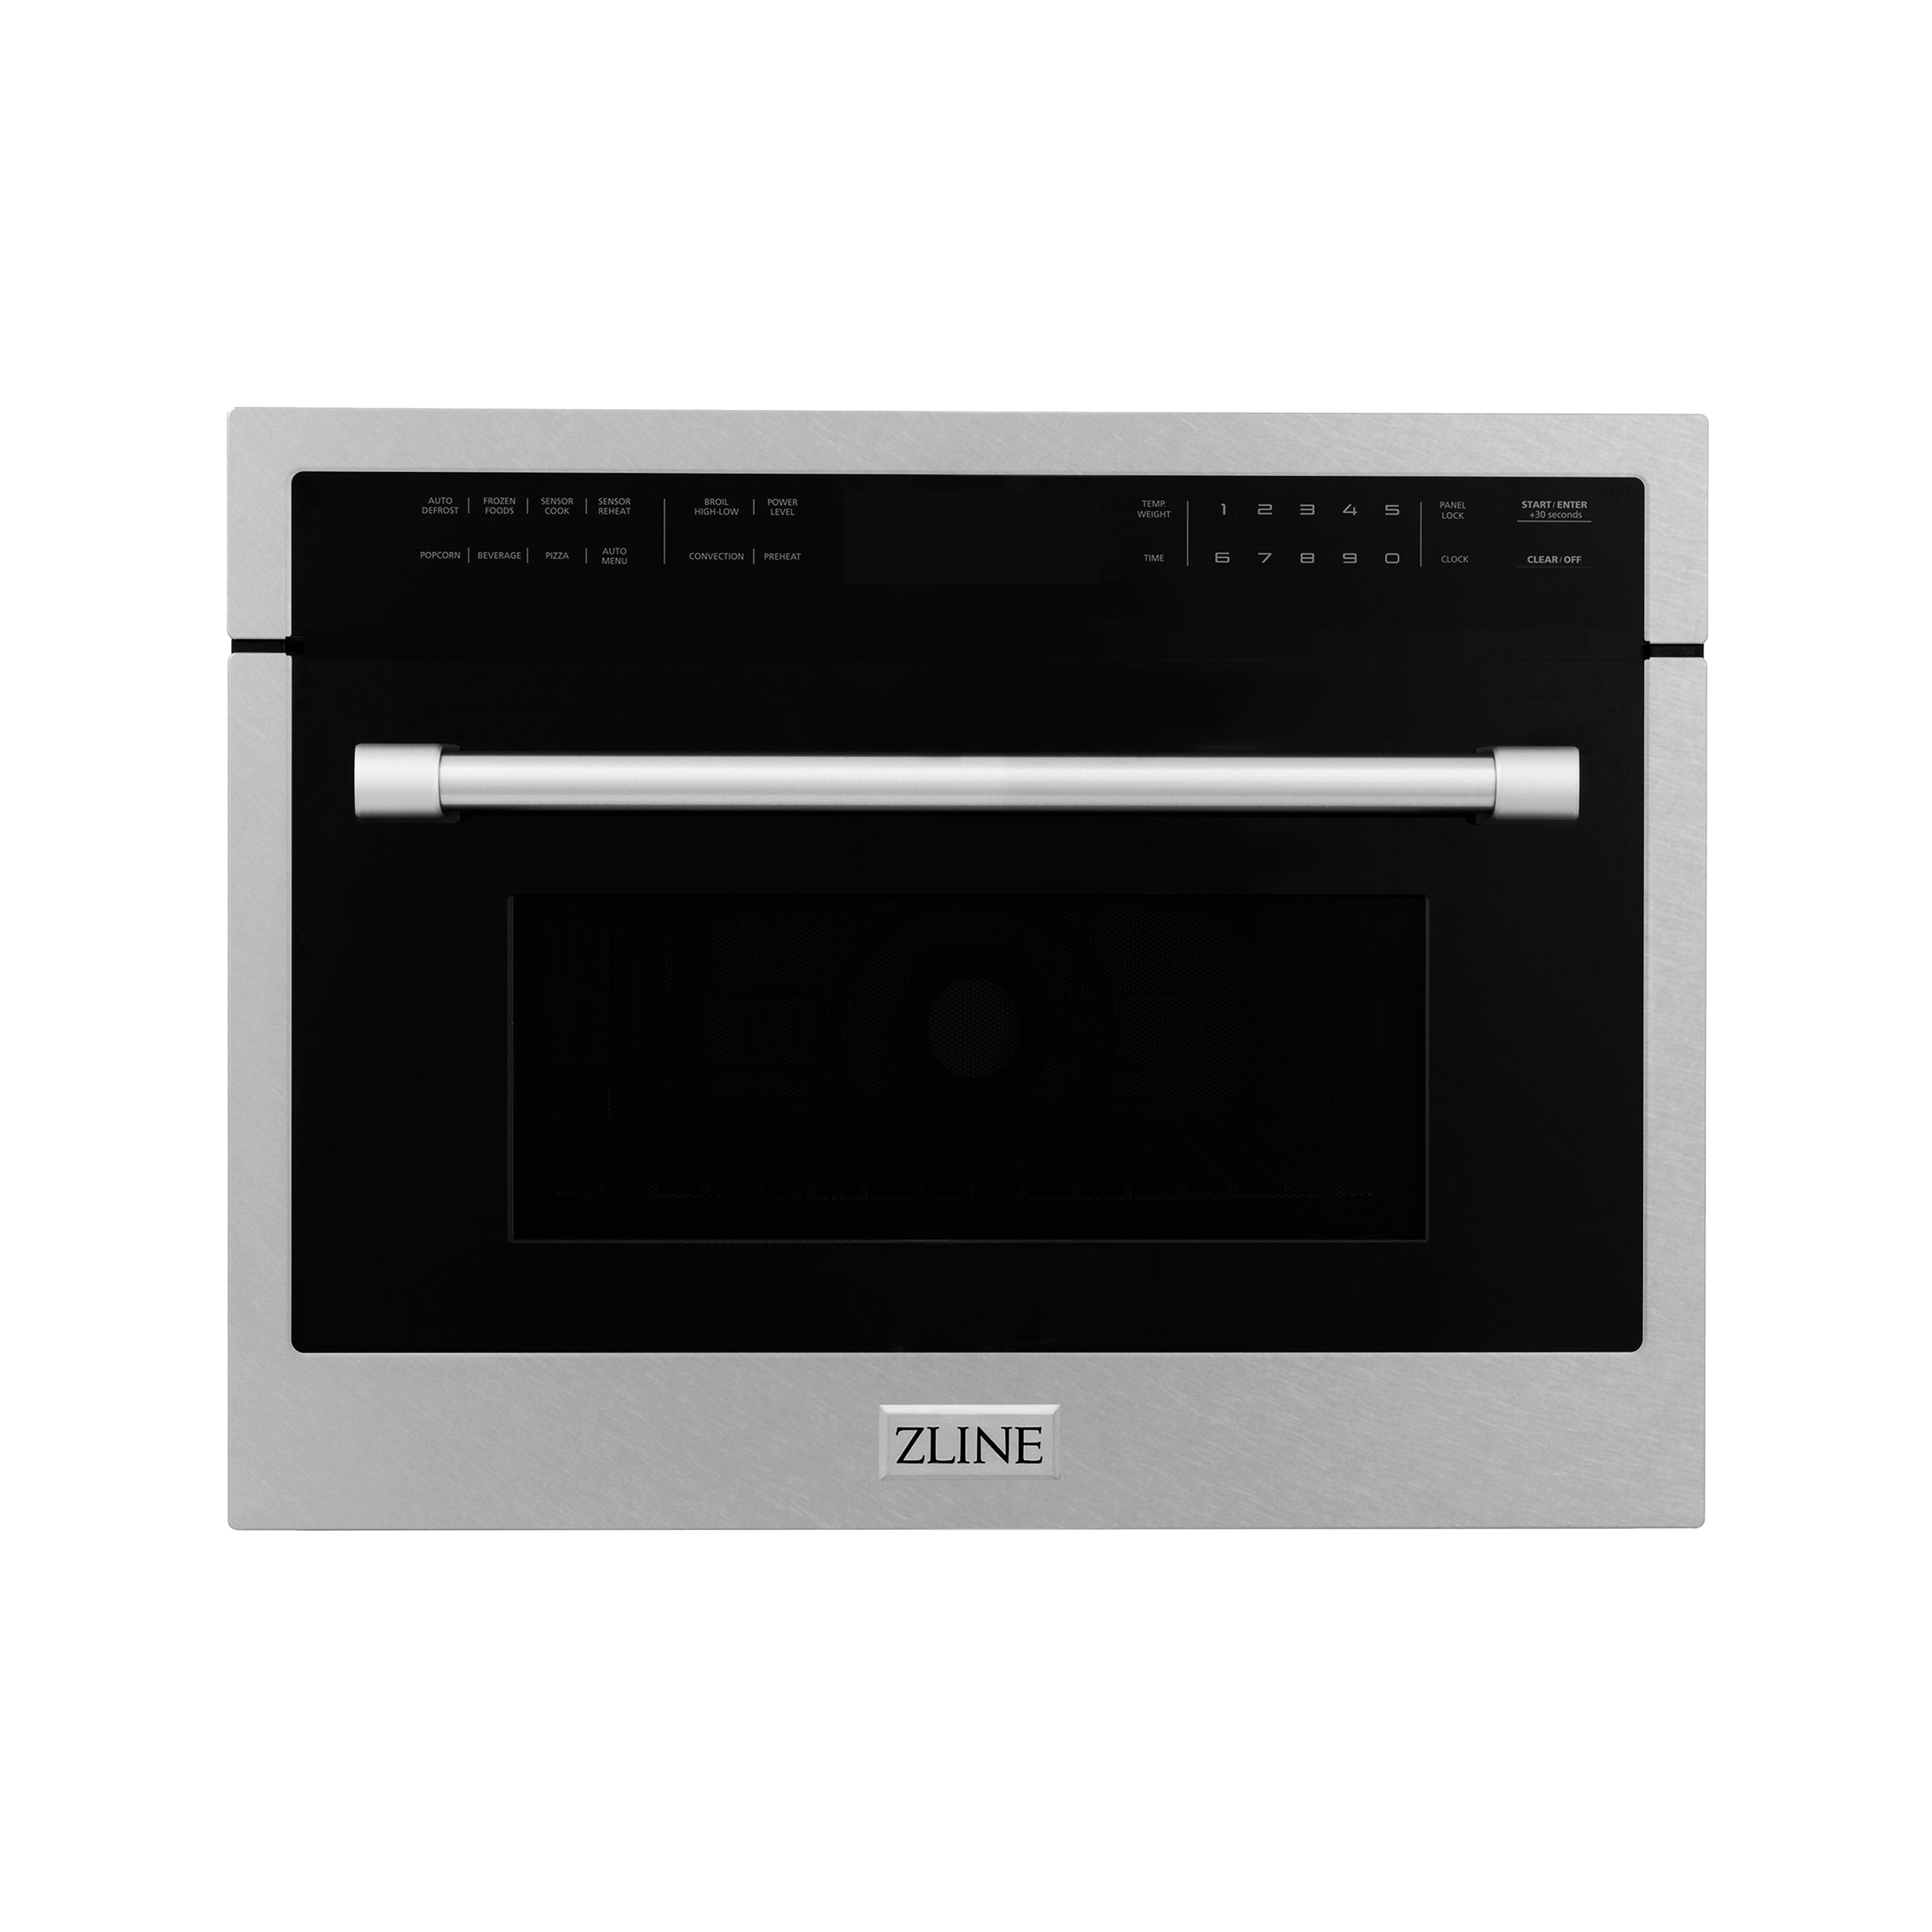 Zline Kitchen and Bath ZLINE 24" Built-in Convection Microwave Oven in Stainless Steel